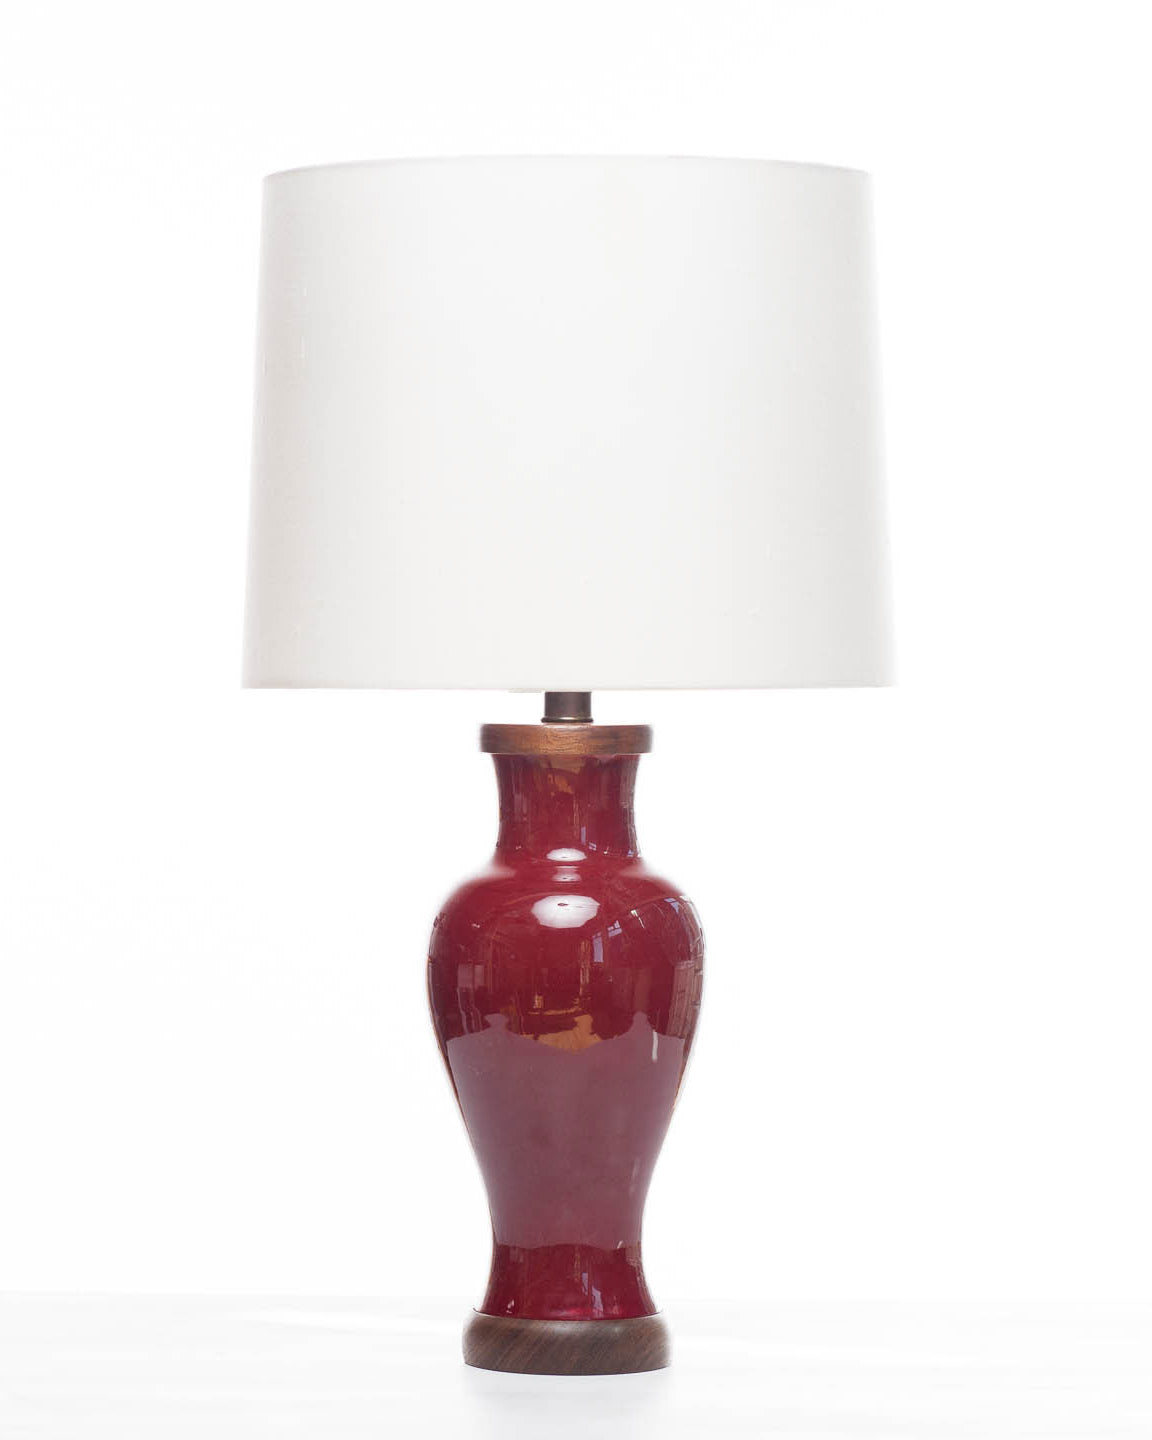 Lawrence & Scott Gabrielle Baluster Porcelain Table Lamp in Pinot Red